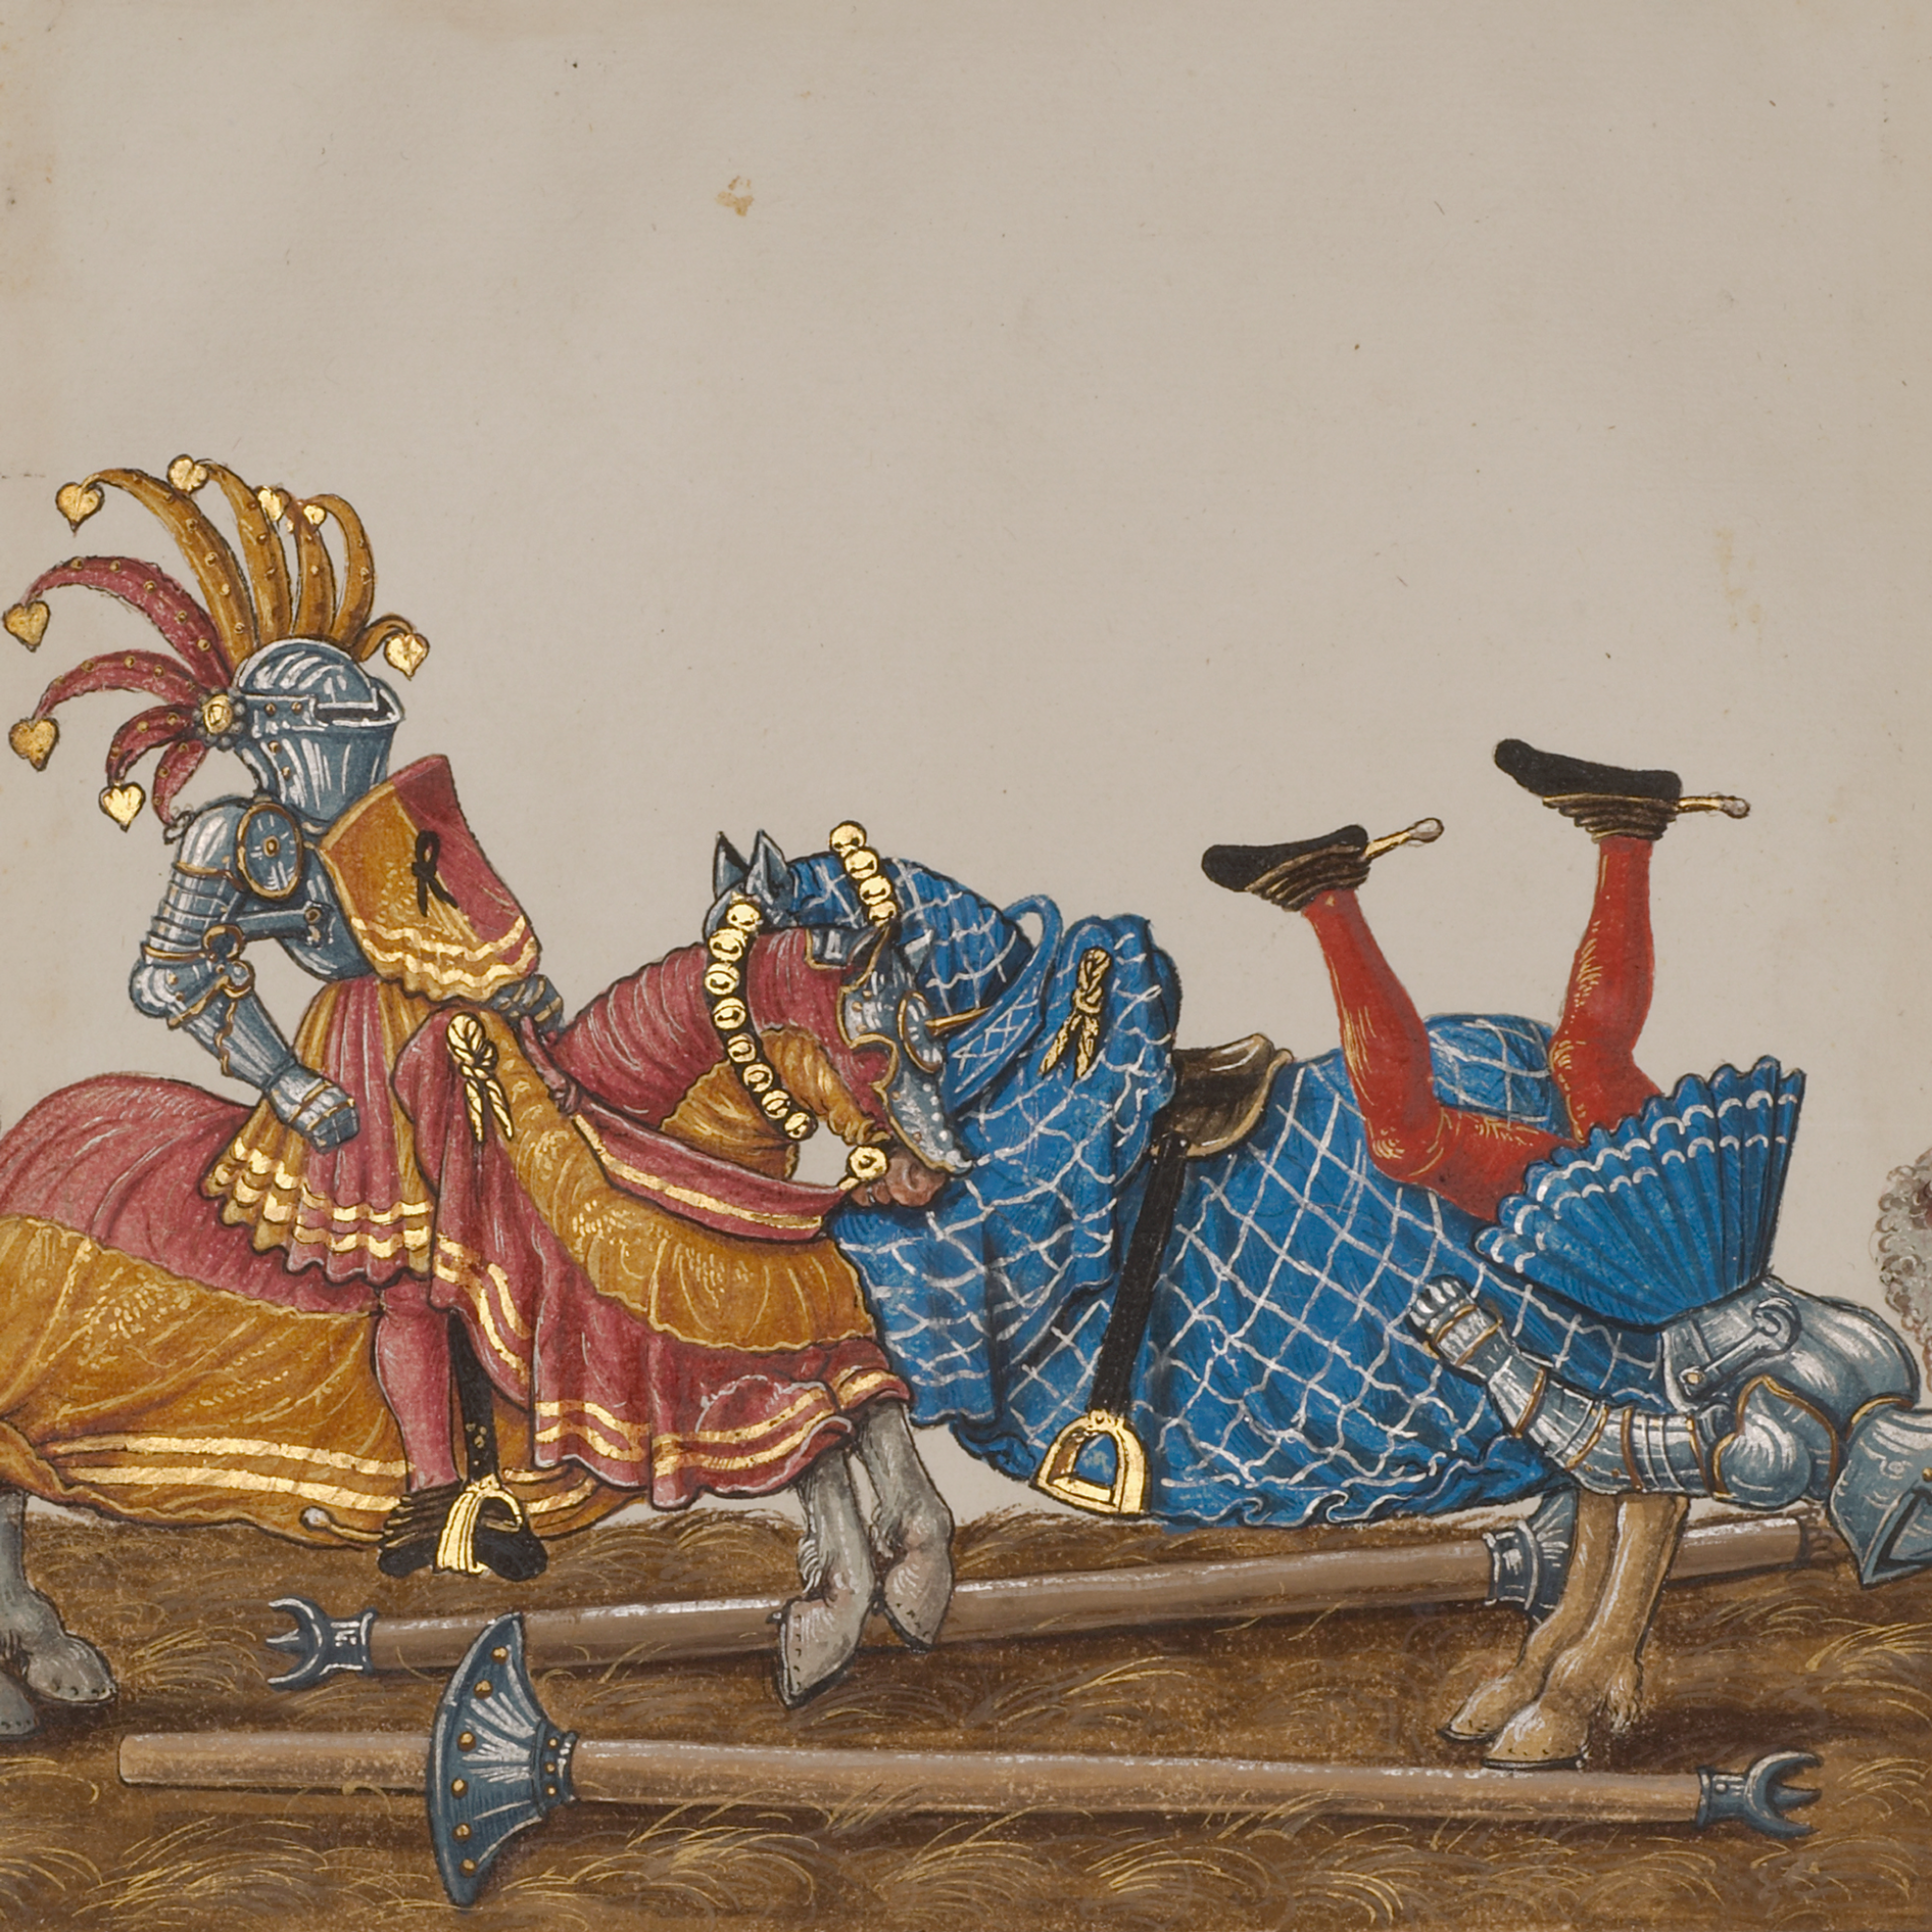 Painting of two figures in metal armor, figure on left rides a horse draped in orange and red fabric, figure on right is facing down, falling off of a horse draped in blue fabric.